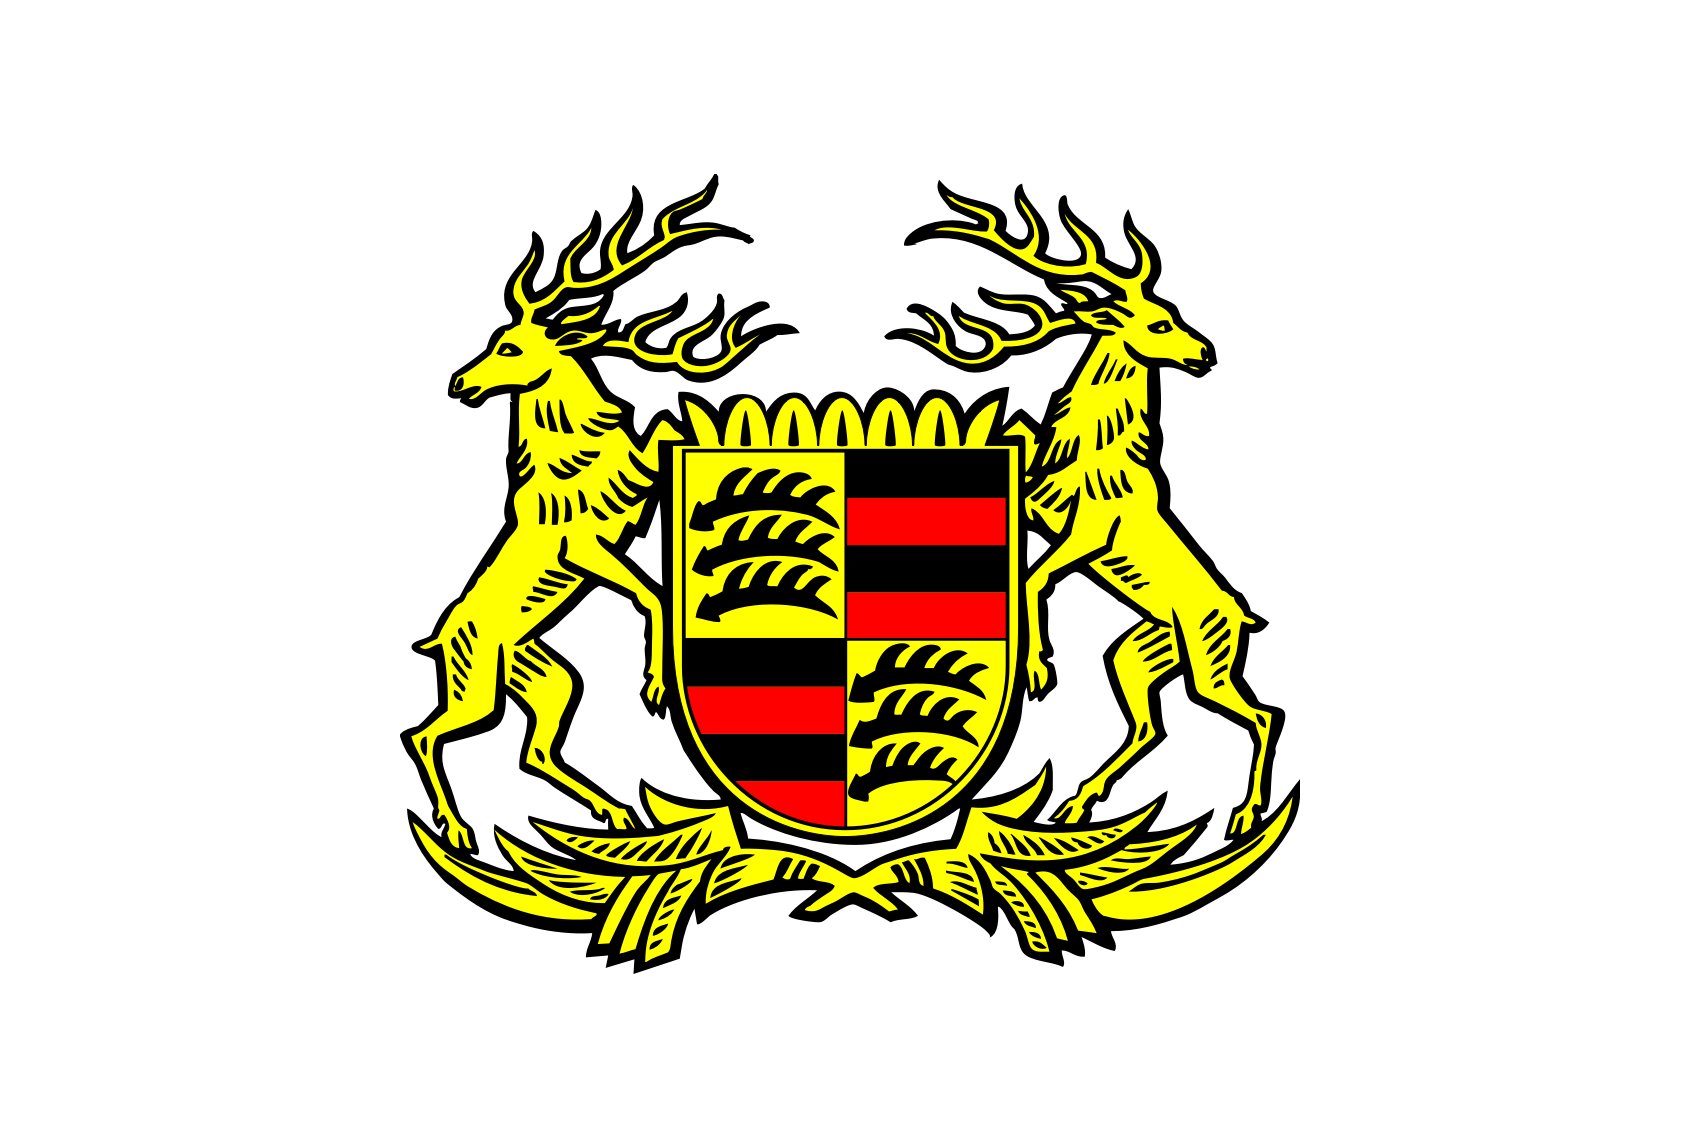 Coat of arms of the Free People's State of Württemberg